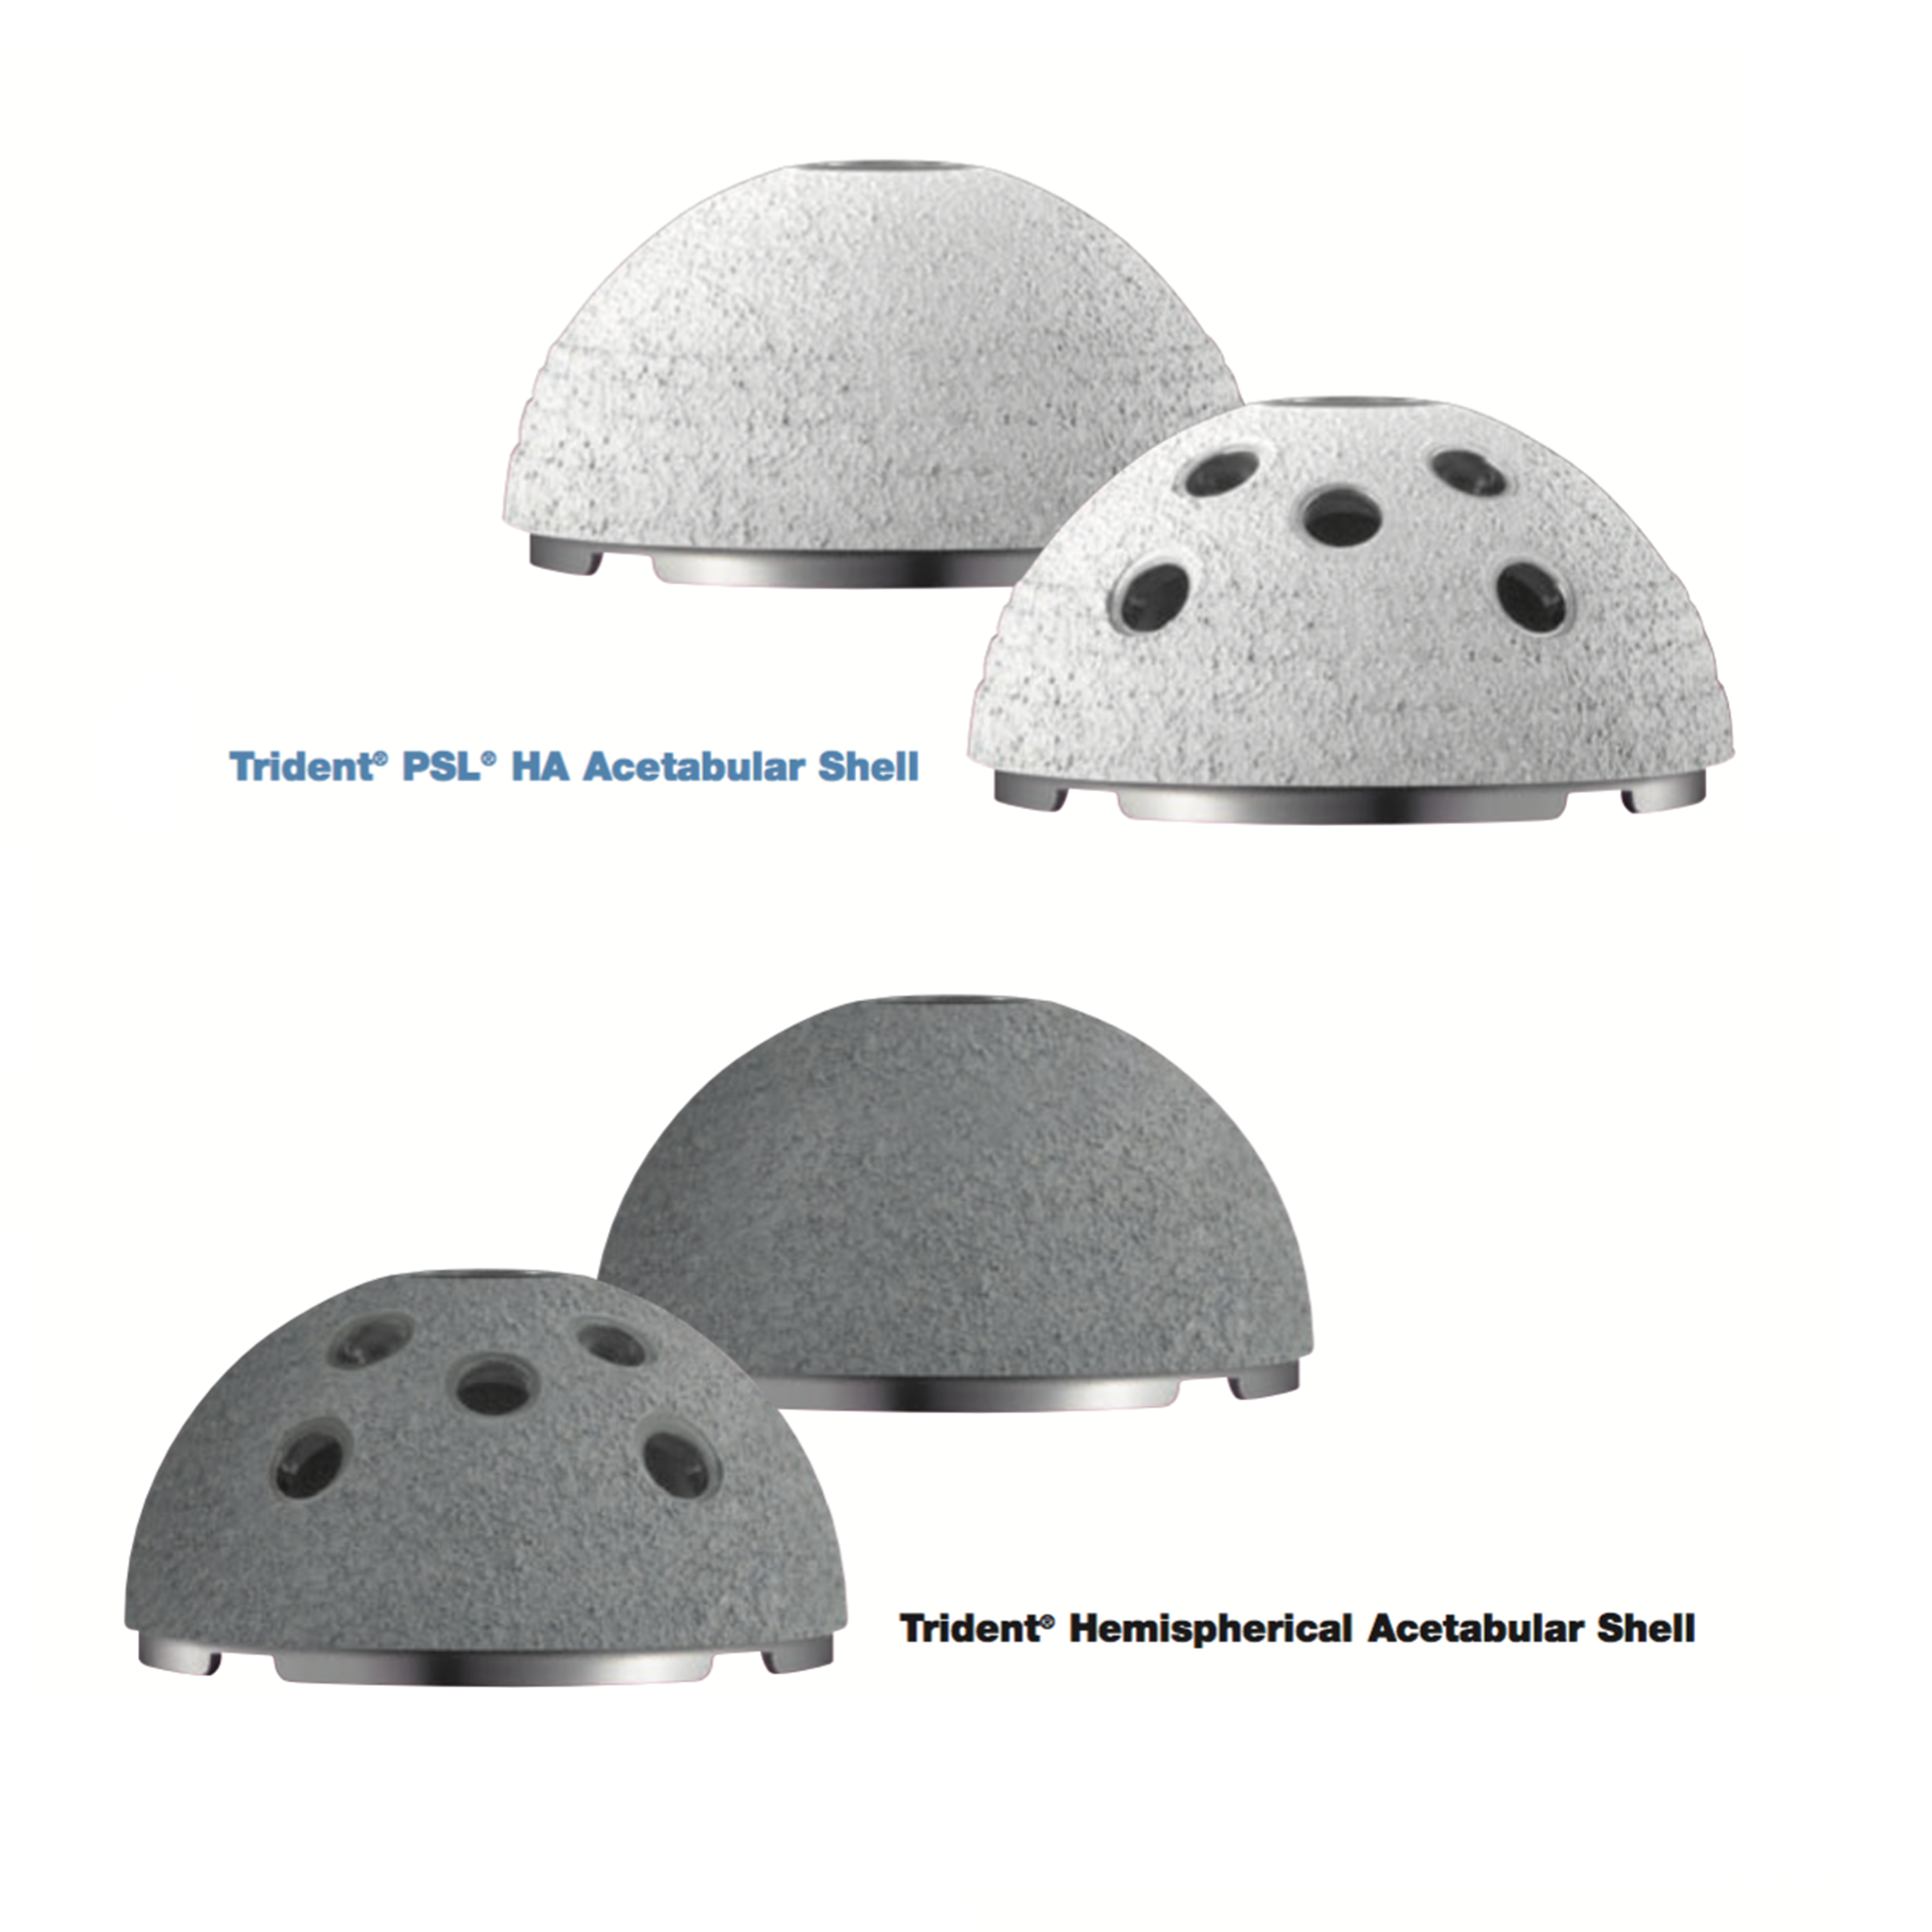 Trident Acetabular Shell | Since 1999, orthopaedic surgeons have chosen Stryker’s Trident Acetabular System for its effectiveness and track record.